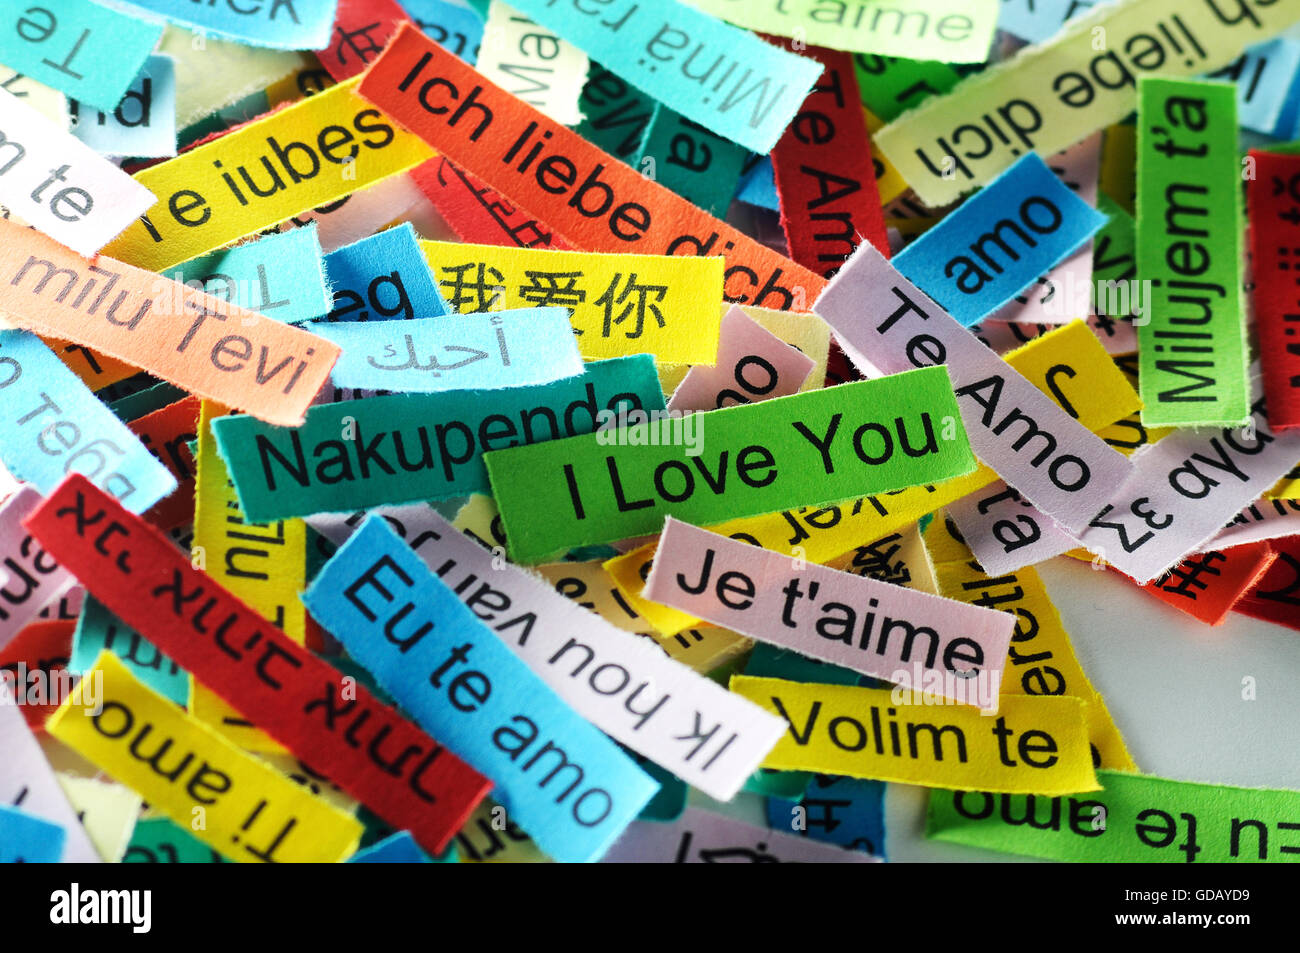 I Love You   Word Cloud printed on colorful paper different languages Stock Photo